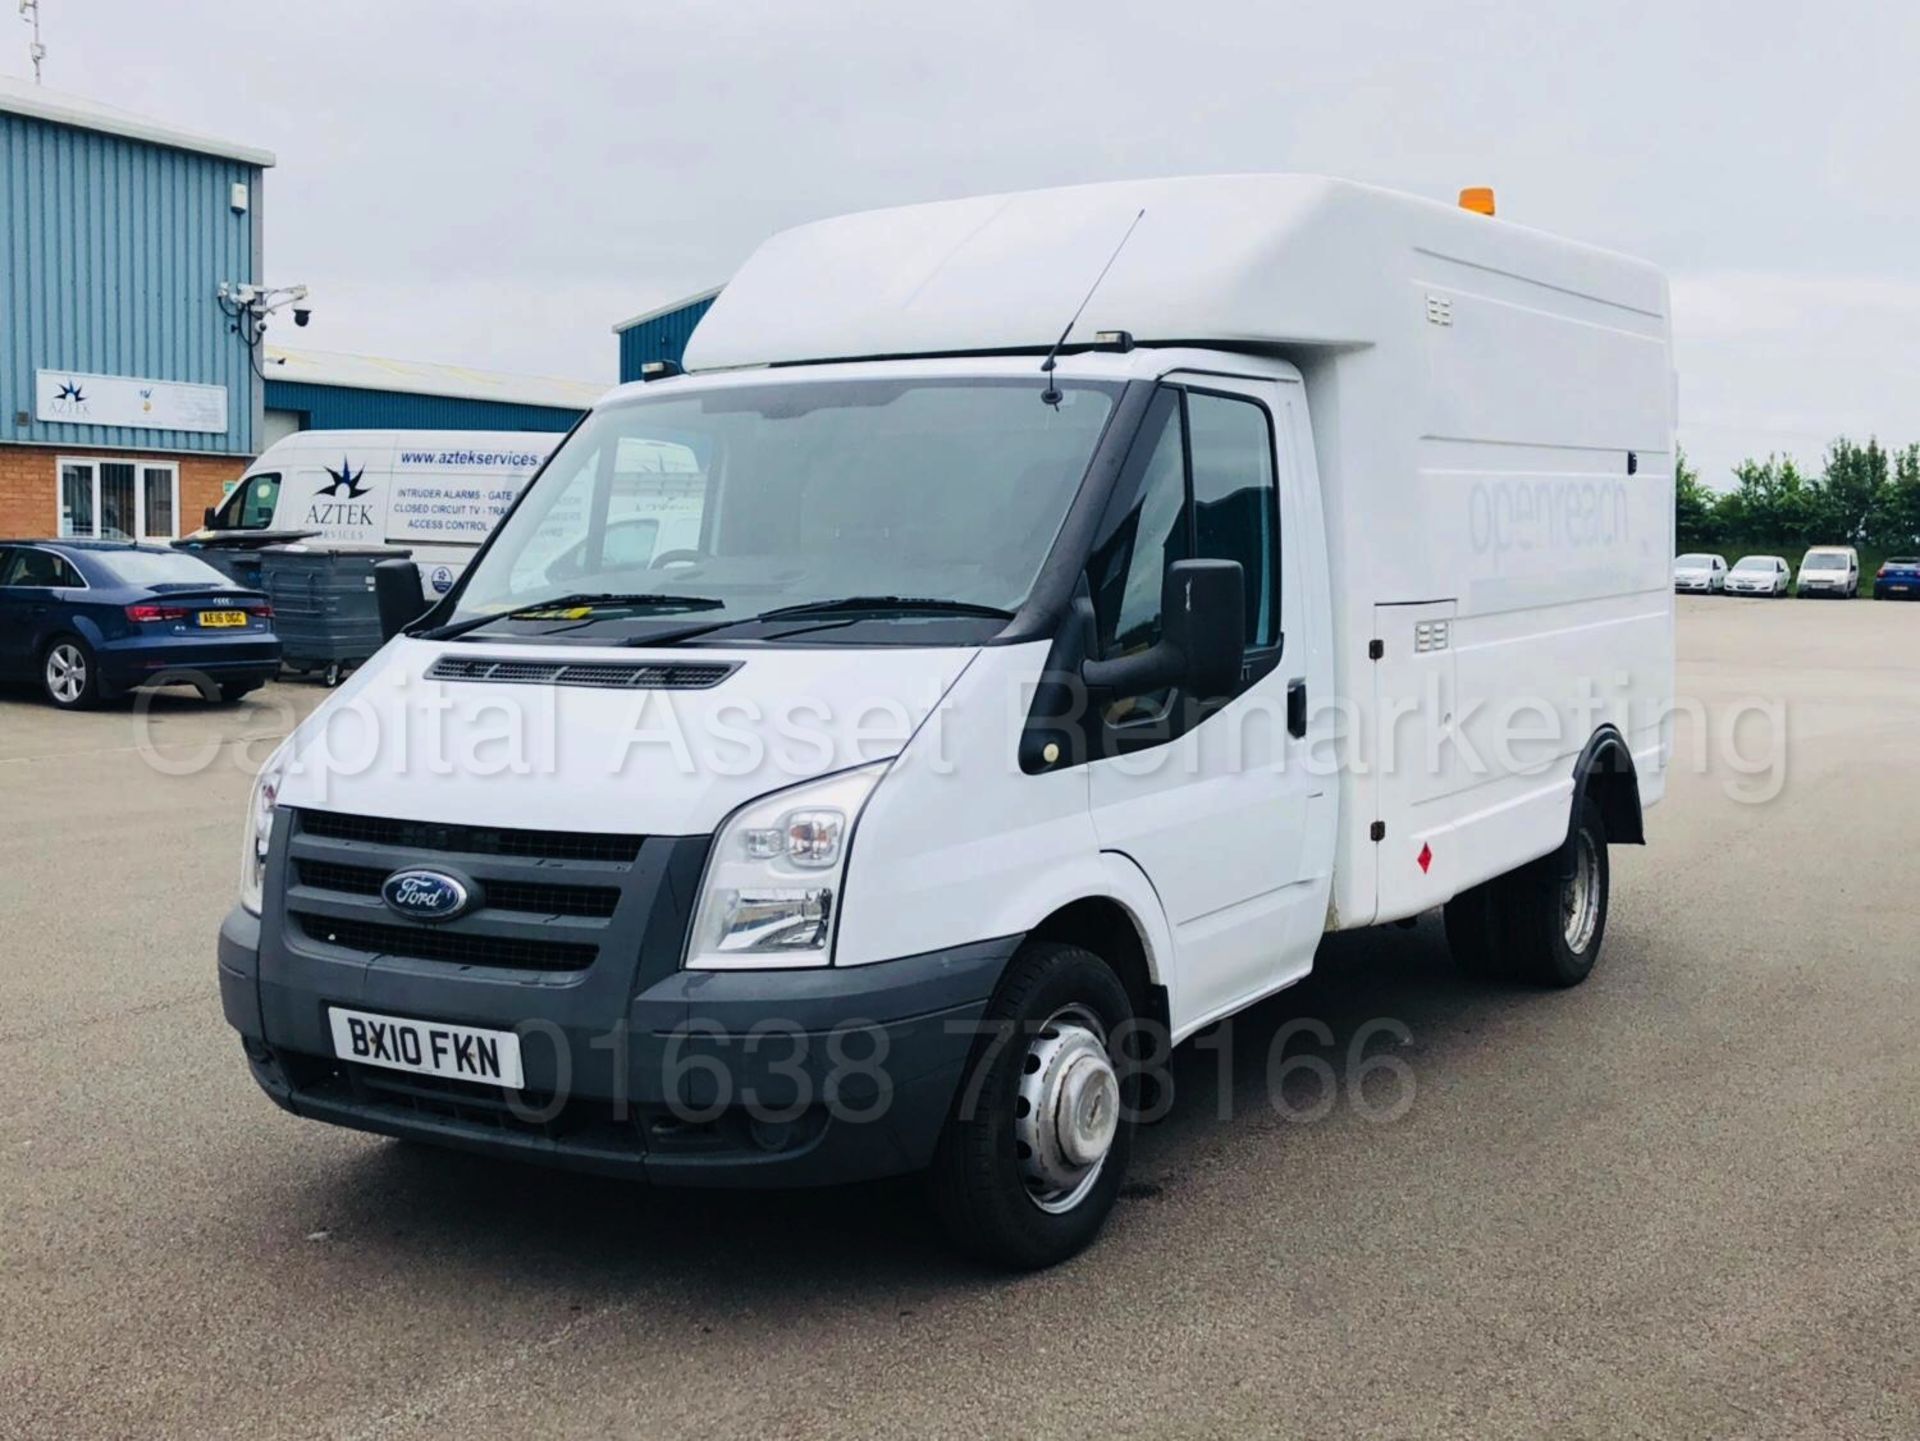 (On Sale) FORD TRANSIT 100 350 'BOX / LUTON VAN' (2010) '2.4 TDCI - 100 BHP' (1 COMPANY OWNER) - Image 3 of 29